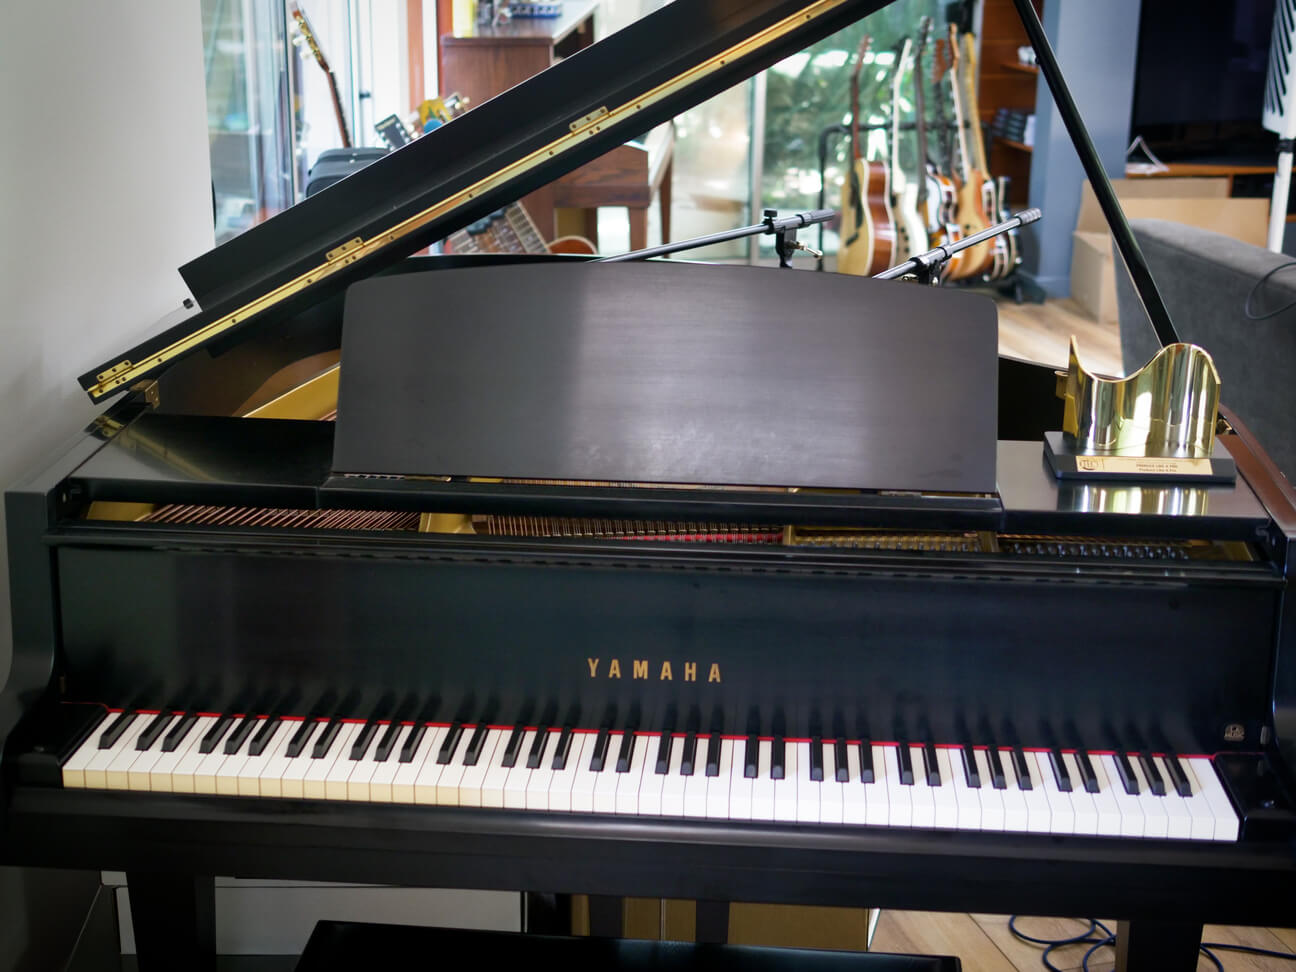 Lovely shiny Yamaha grand piano belonging to Warren Huart with an upright and at least five guitars in the background